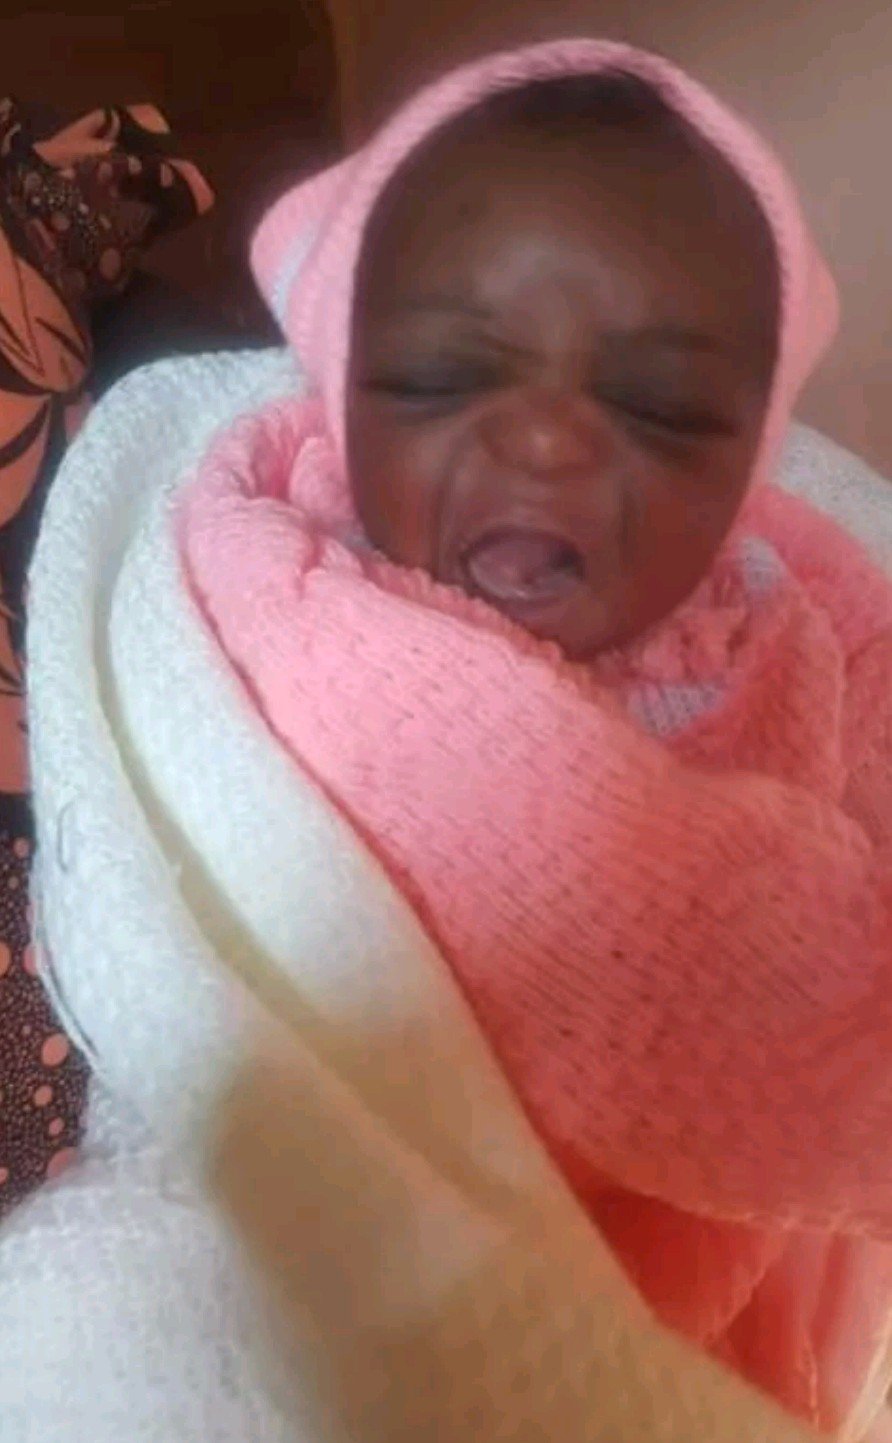 https://www.gistreel.com/good-samaritan-rescues-baby-dumped-by-the-roadside-by-unidentified-mother-photos/